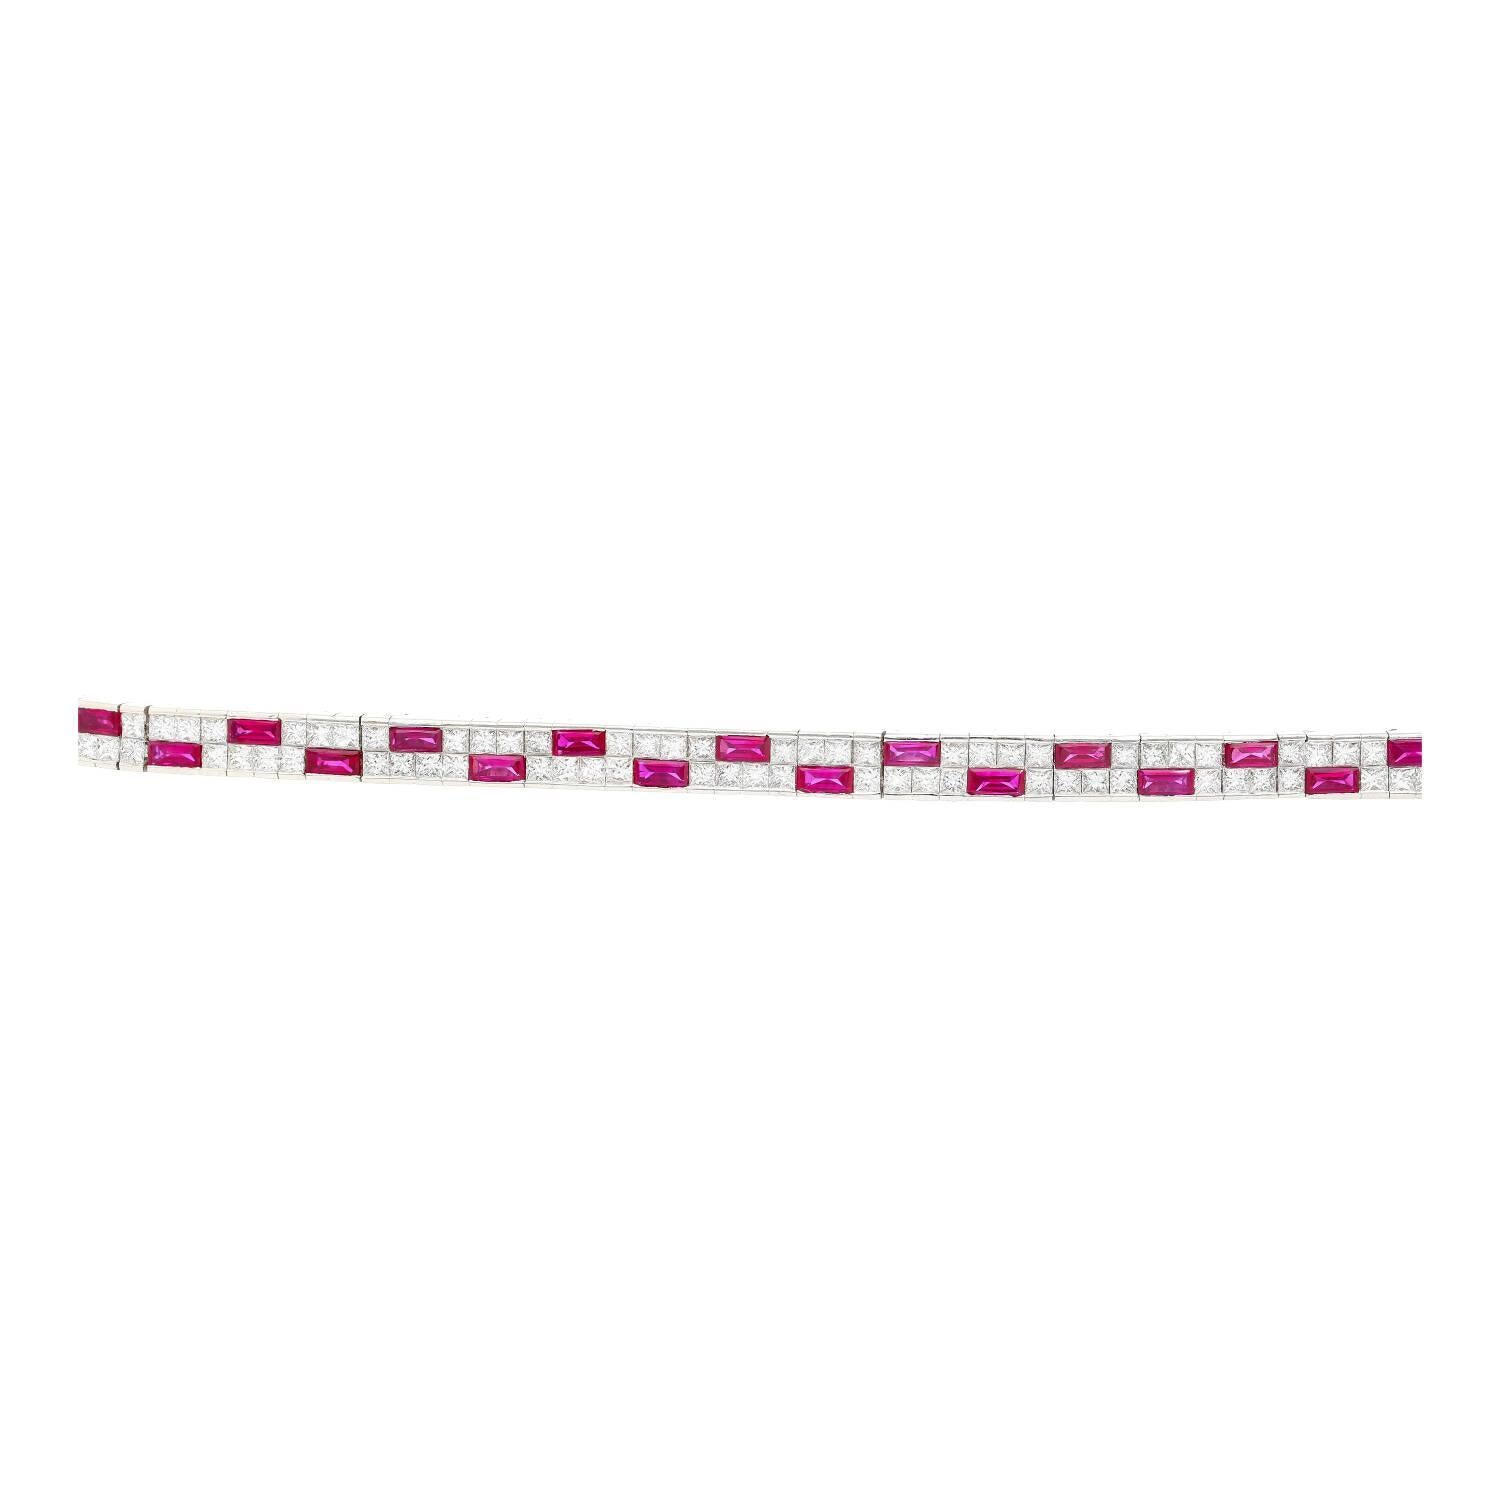 Channel, Bezel, and Pave Set Natural Ruby and Diamond Art deco Style Geometric Two-Row Bracelet in 18K White Gold. 12 carats total of rubies and diamonds.

Details: 
✔ Item Type: Bracelet
✔ Metal: 18k White Gold
✔ Size: 7.25 inches 
✔ Weight: 28